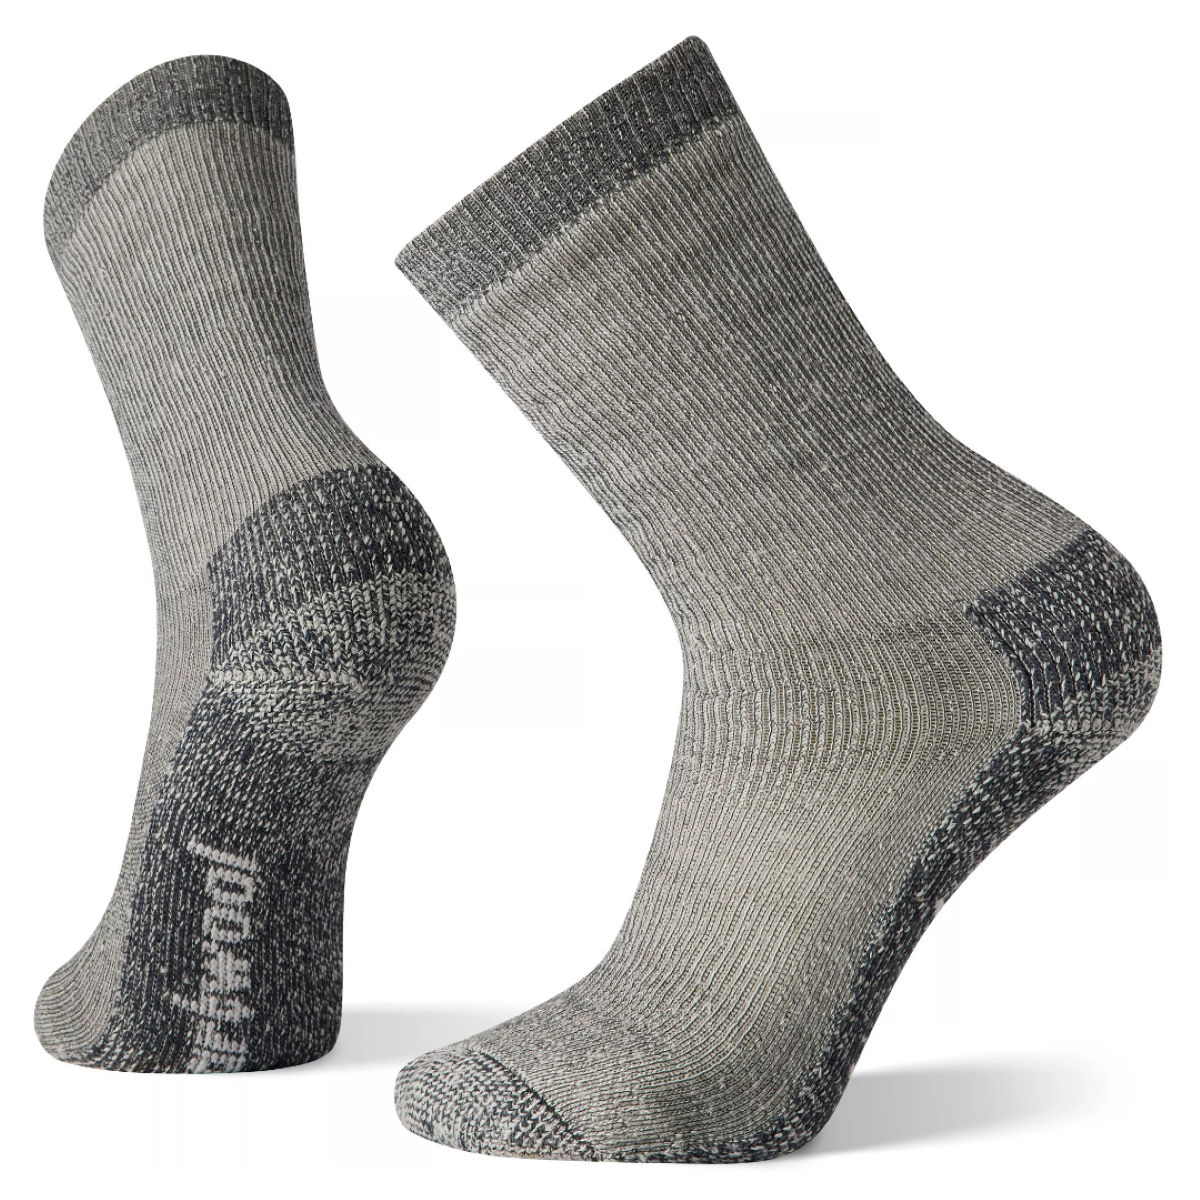 Calcetines deportivos Smartwool Classic Hike (con acolchamiento extra) - Calcetines